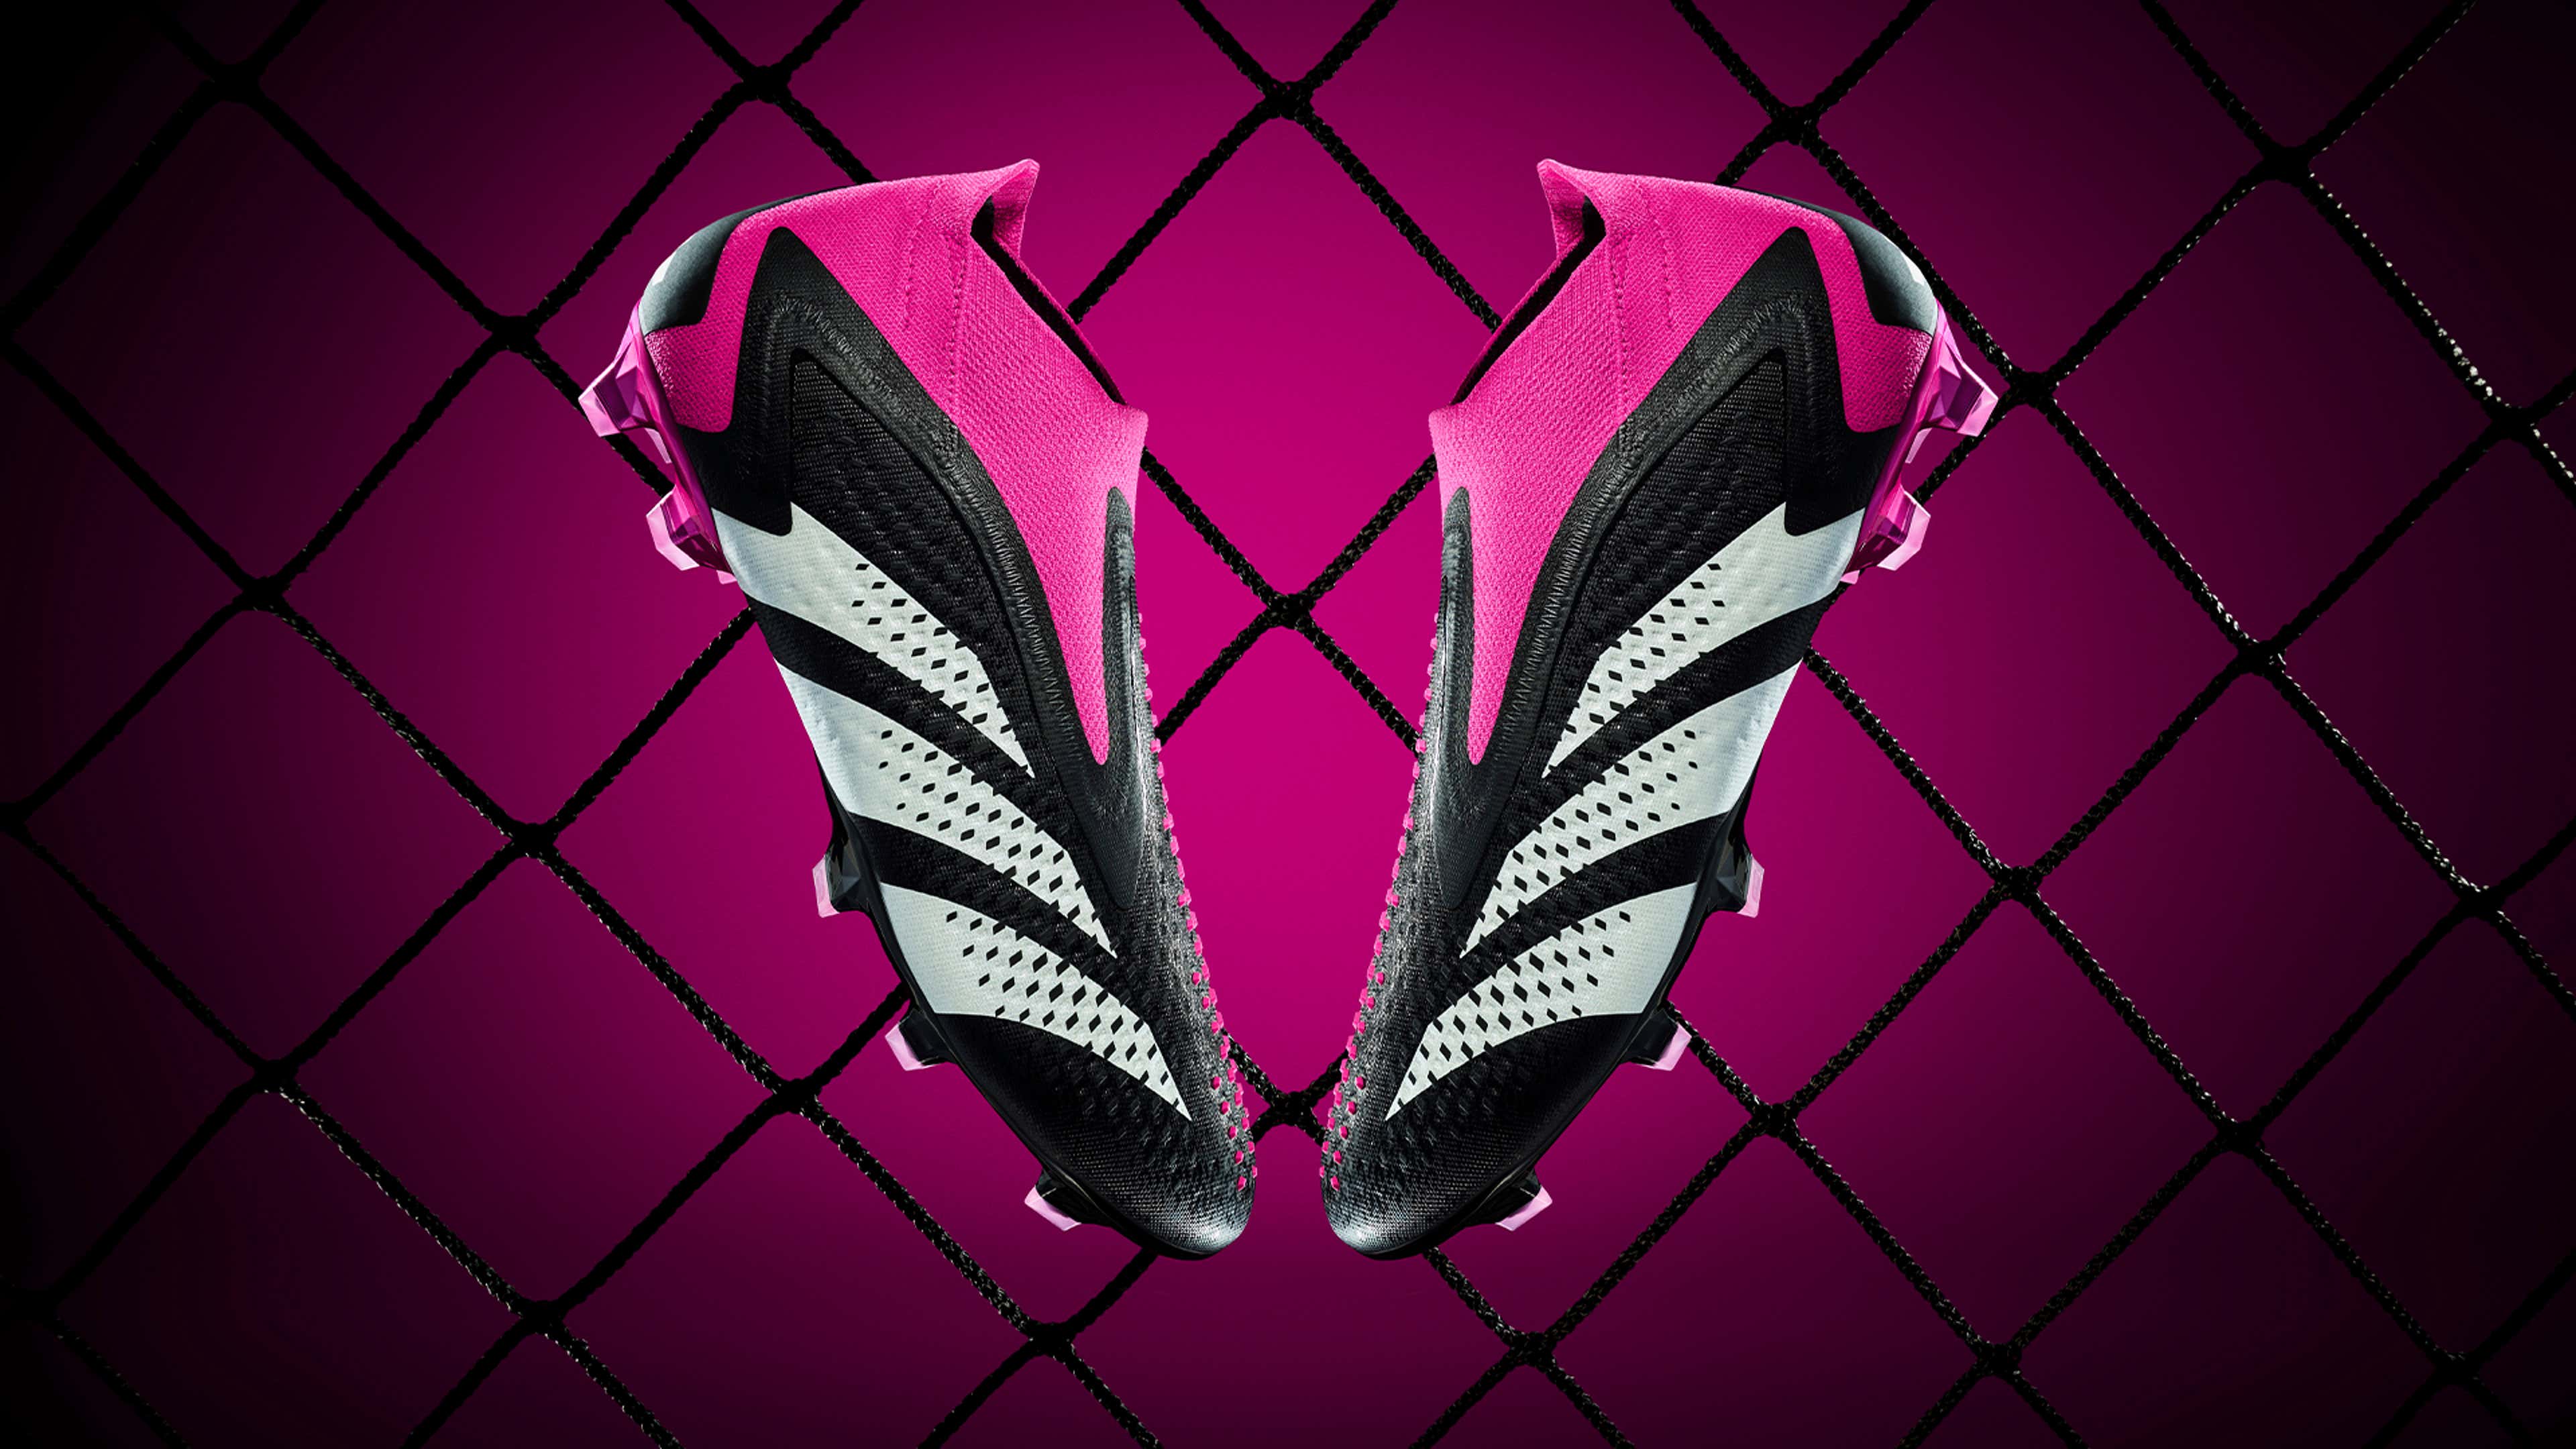 Adidas Predator Edge 94 Boots Released - Inspired by the First